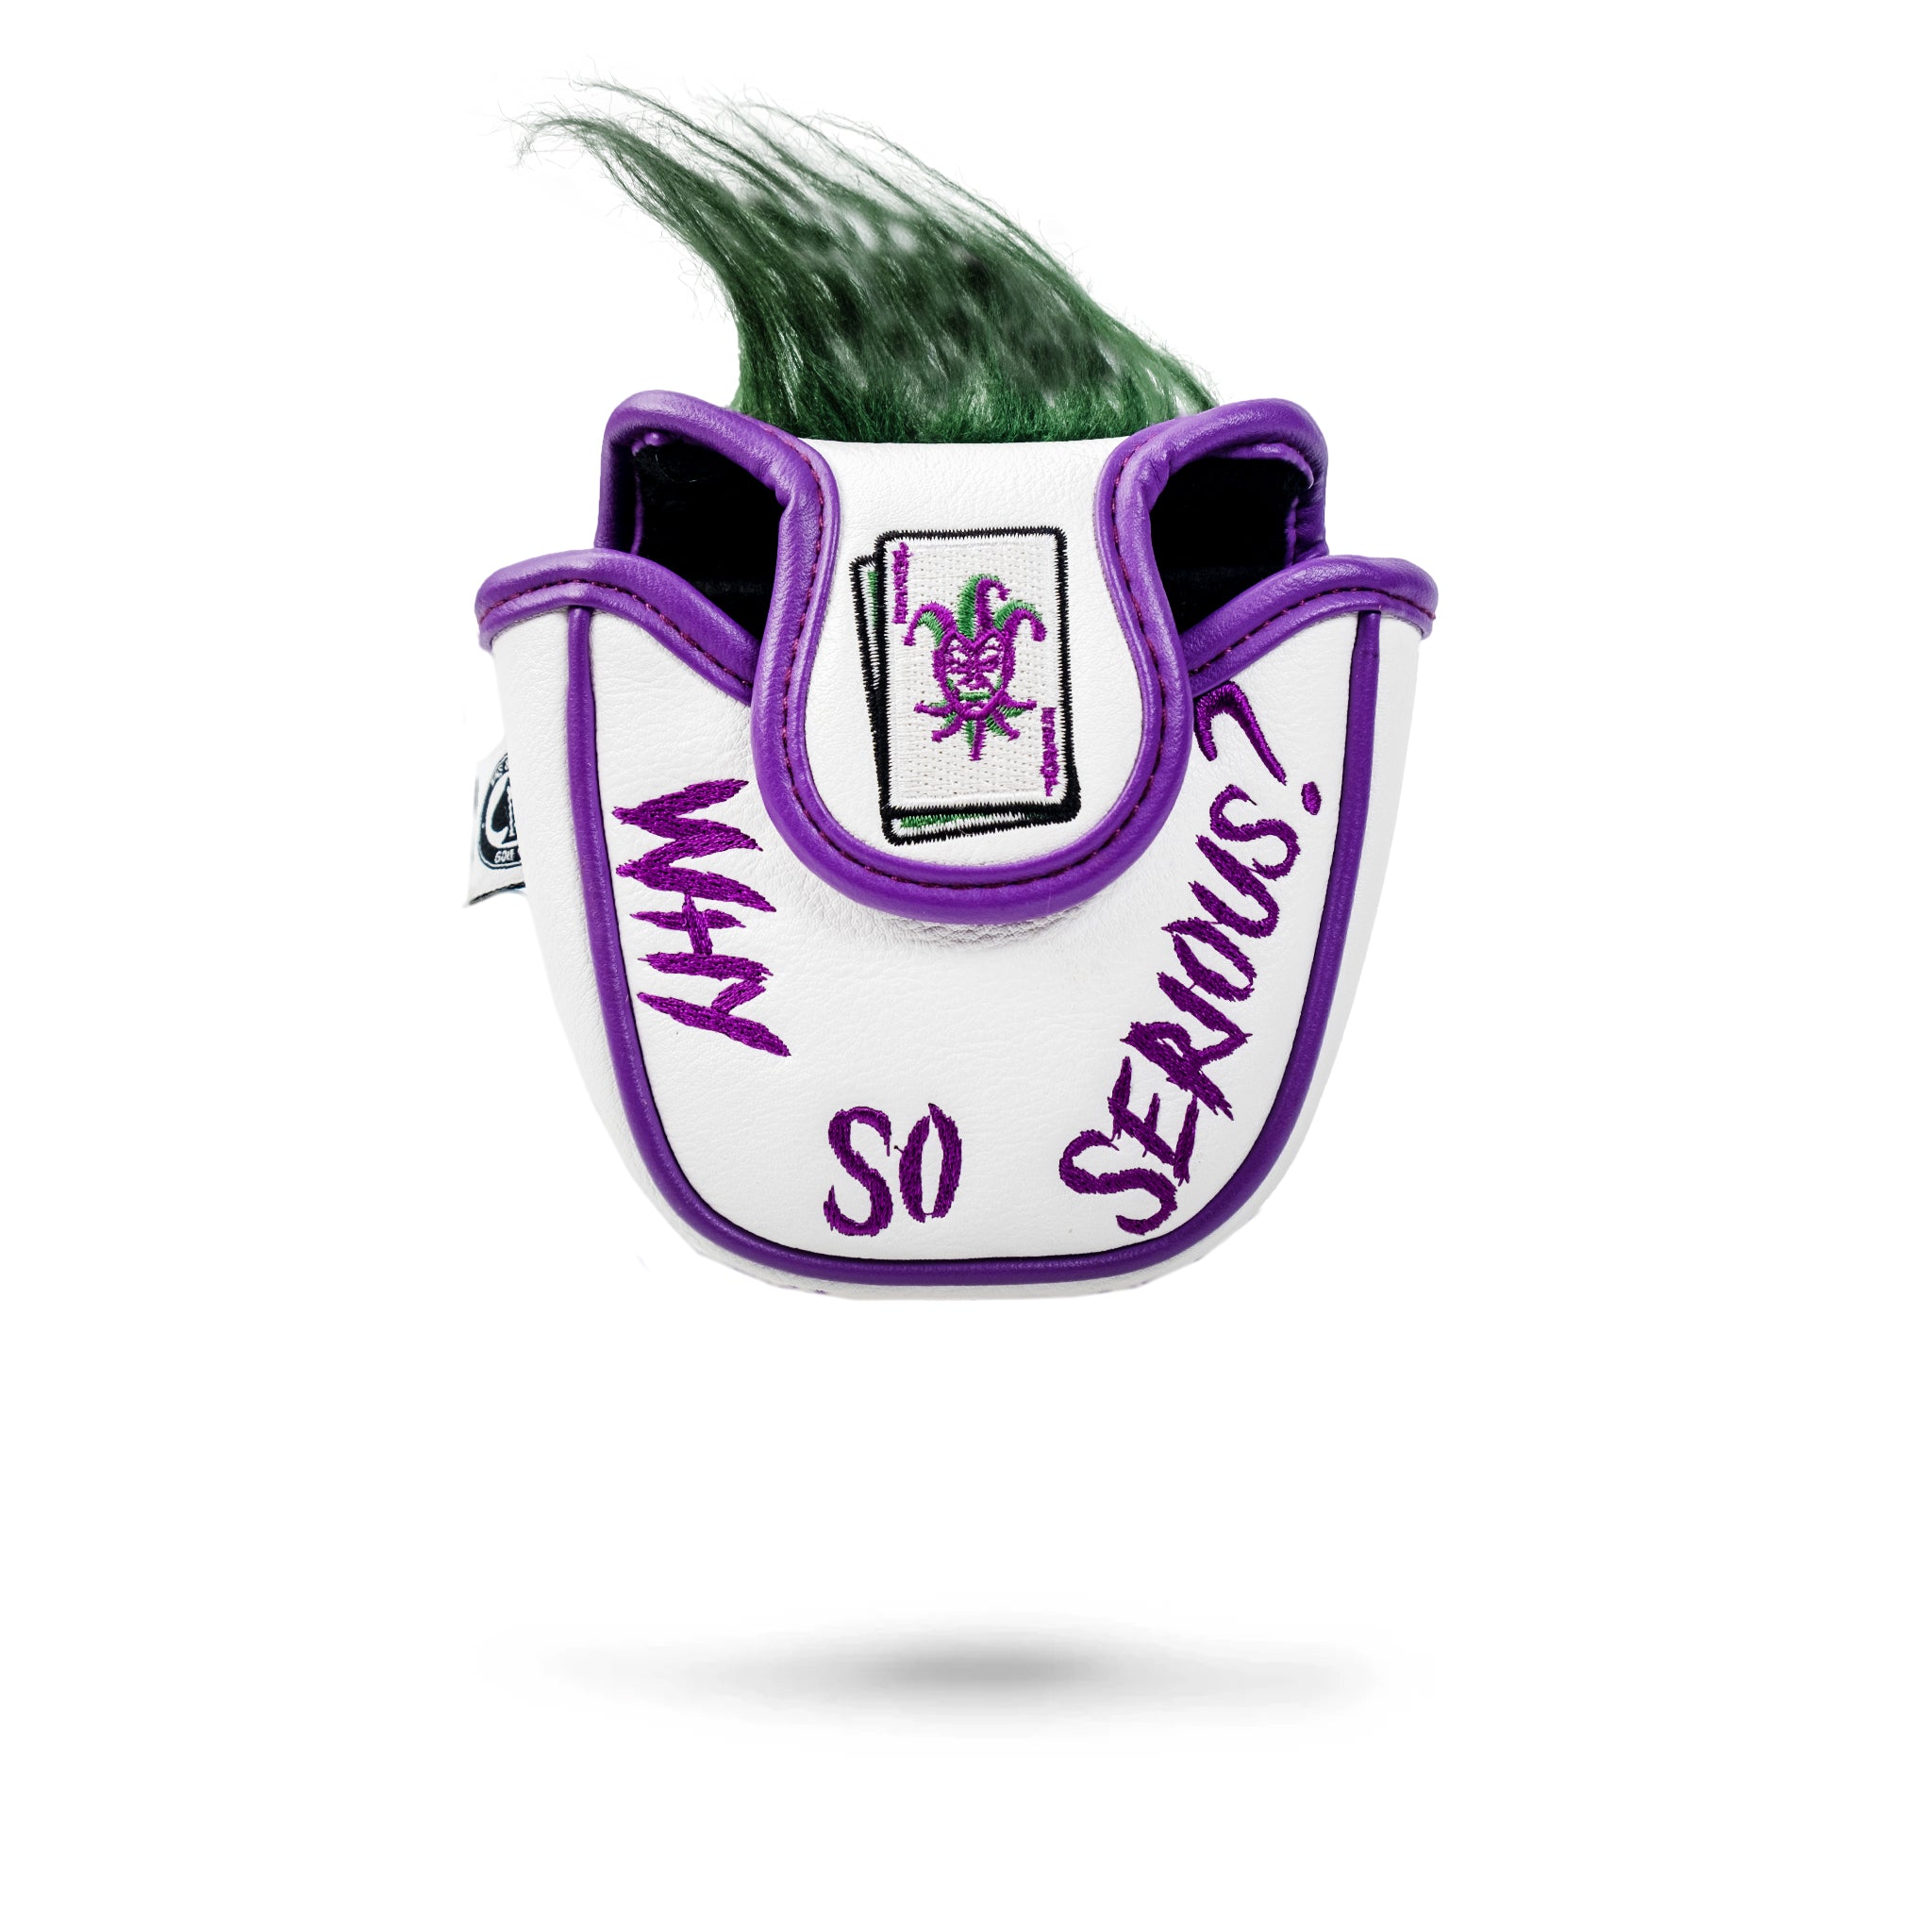 Joker - Mallet Putter Cover – Pins and Aces